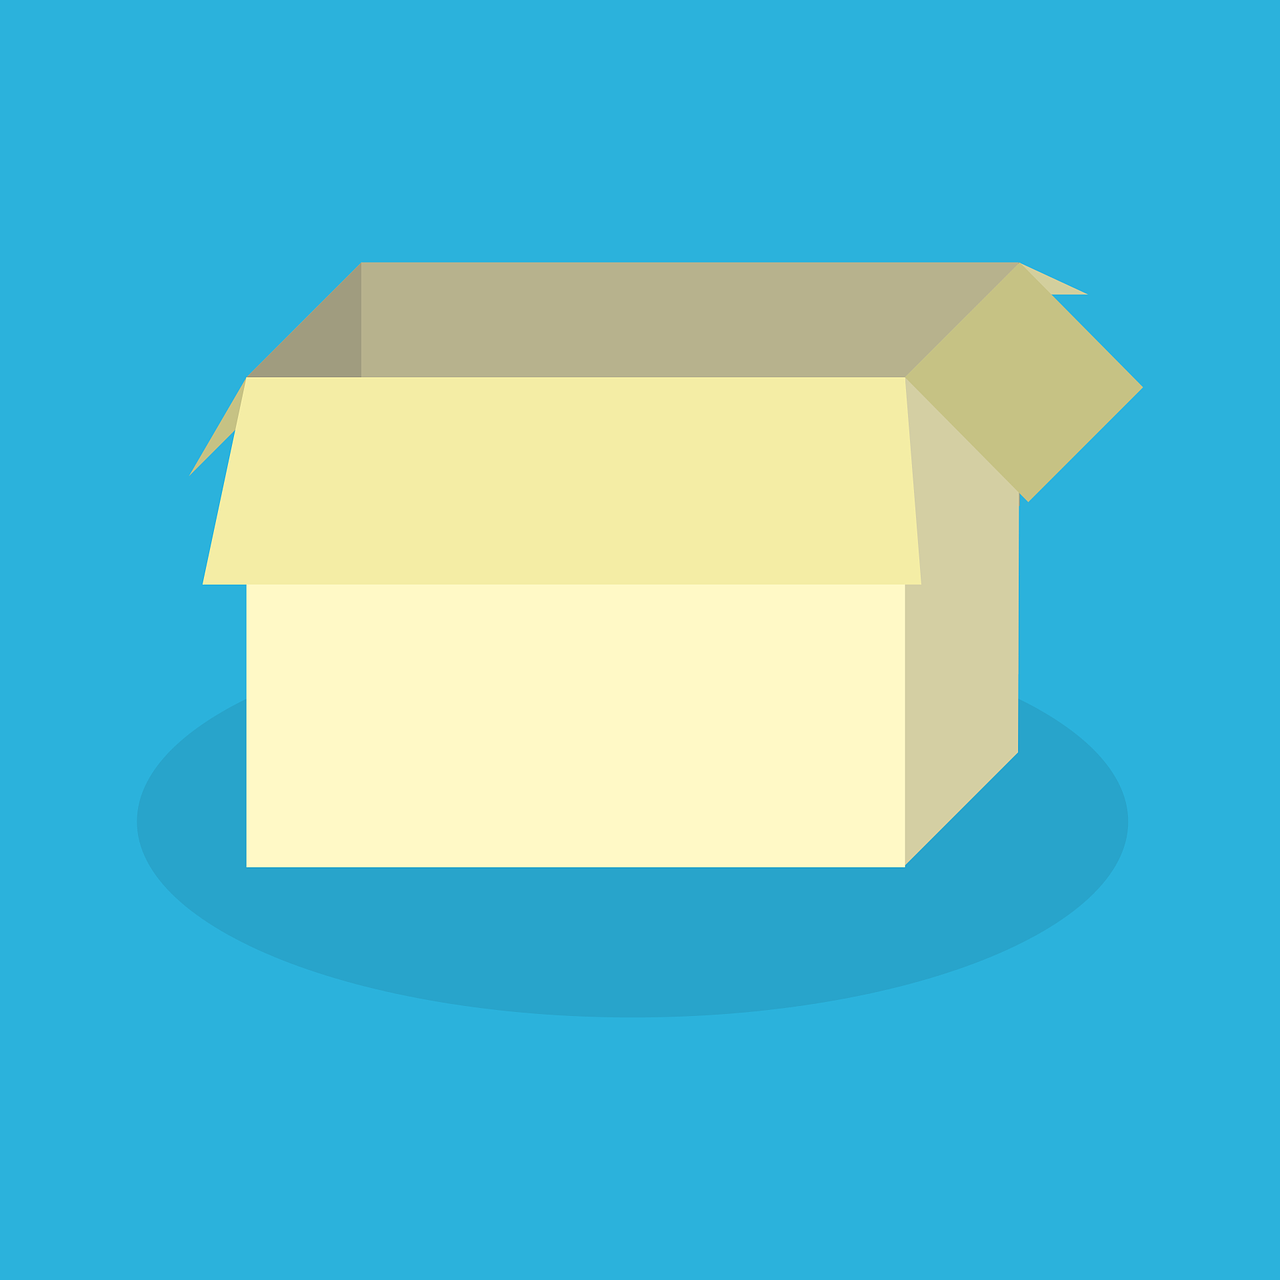 an open cardboard box on a blue background, an illustration of, postminimalism, flat - color, smooth illustration, yellowed, icon